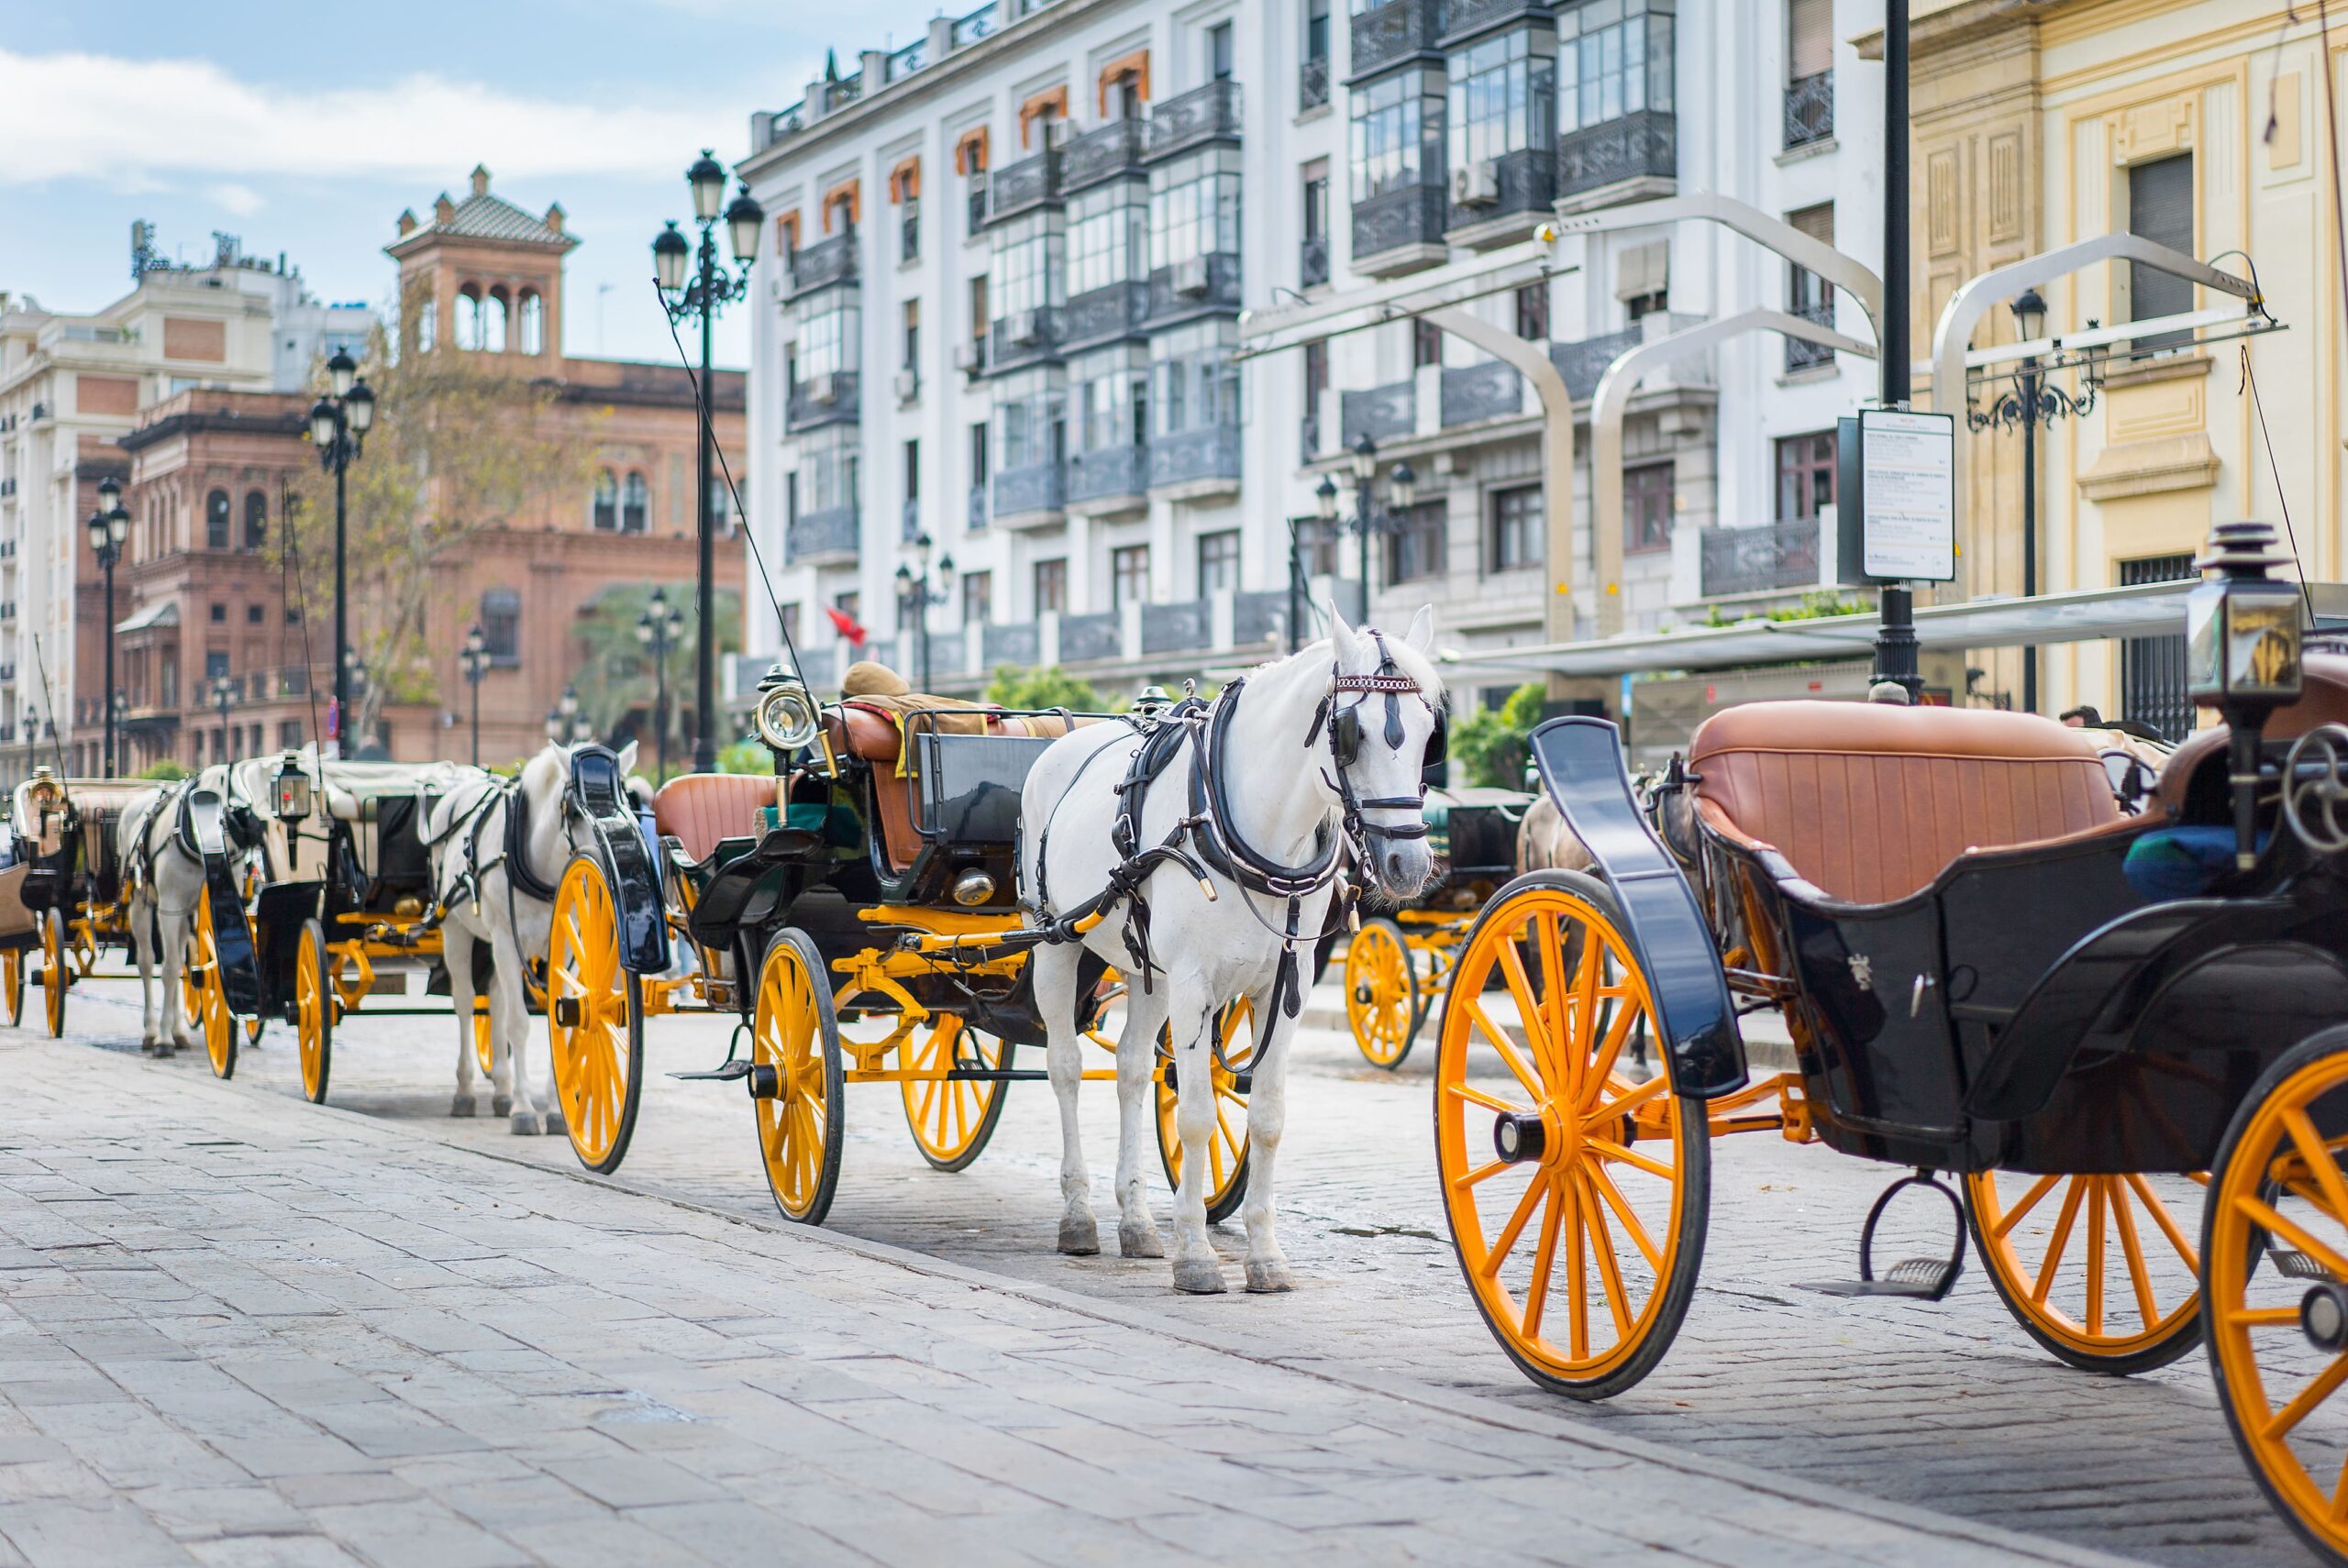 Horse Drawn Carriage Tours - Transportation Options